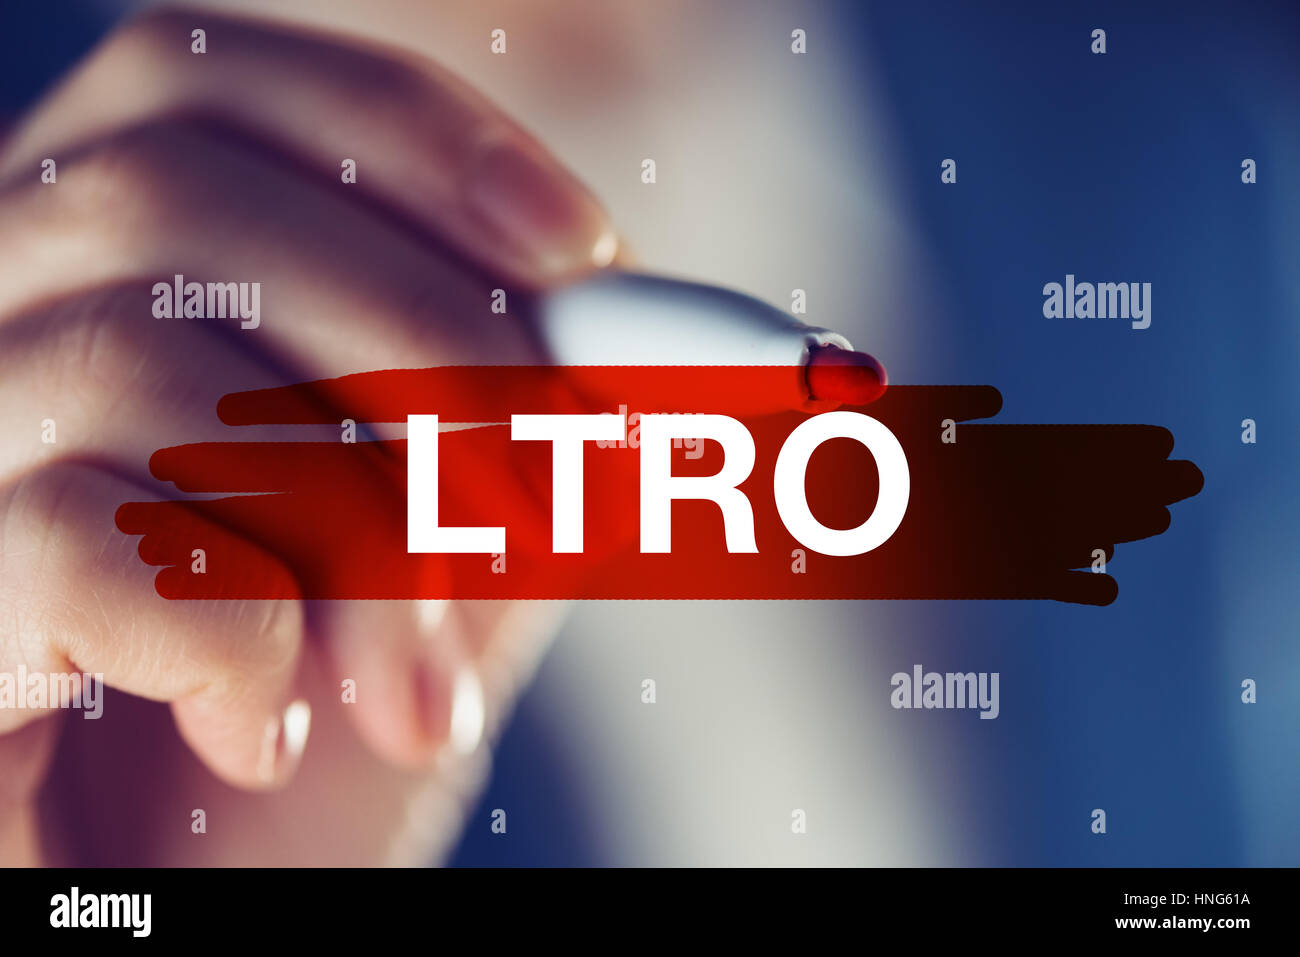 LTRO - long term refinancing operation concept, red marker pen highlighting the acronym Stock Photo